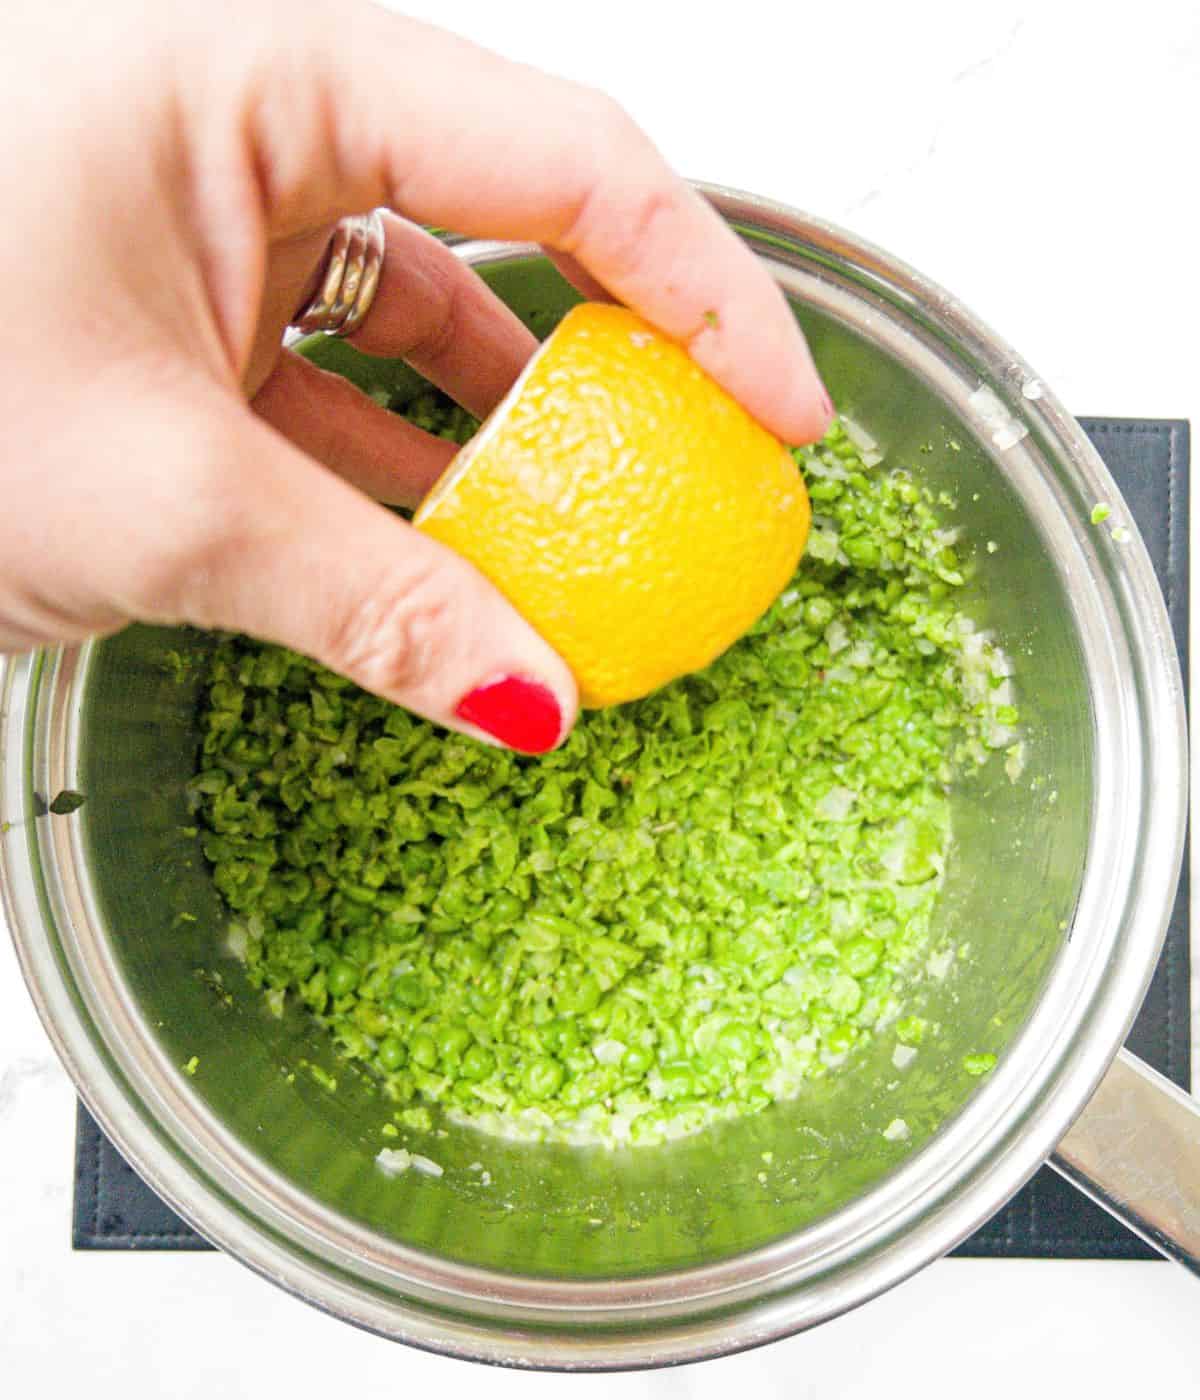 Lemon being squeezed into a pan of mushy peas.